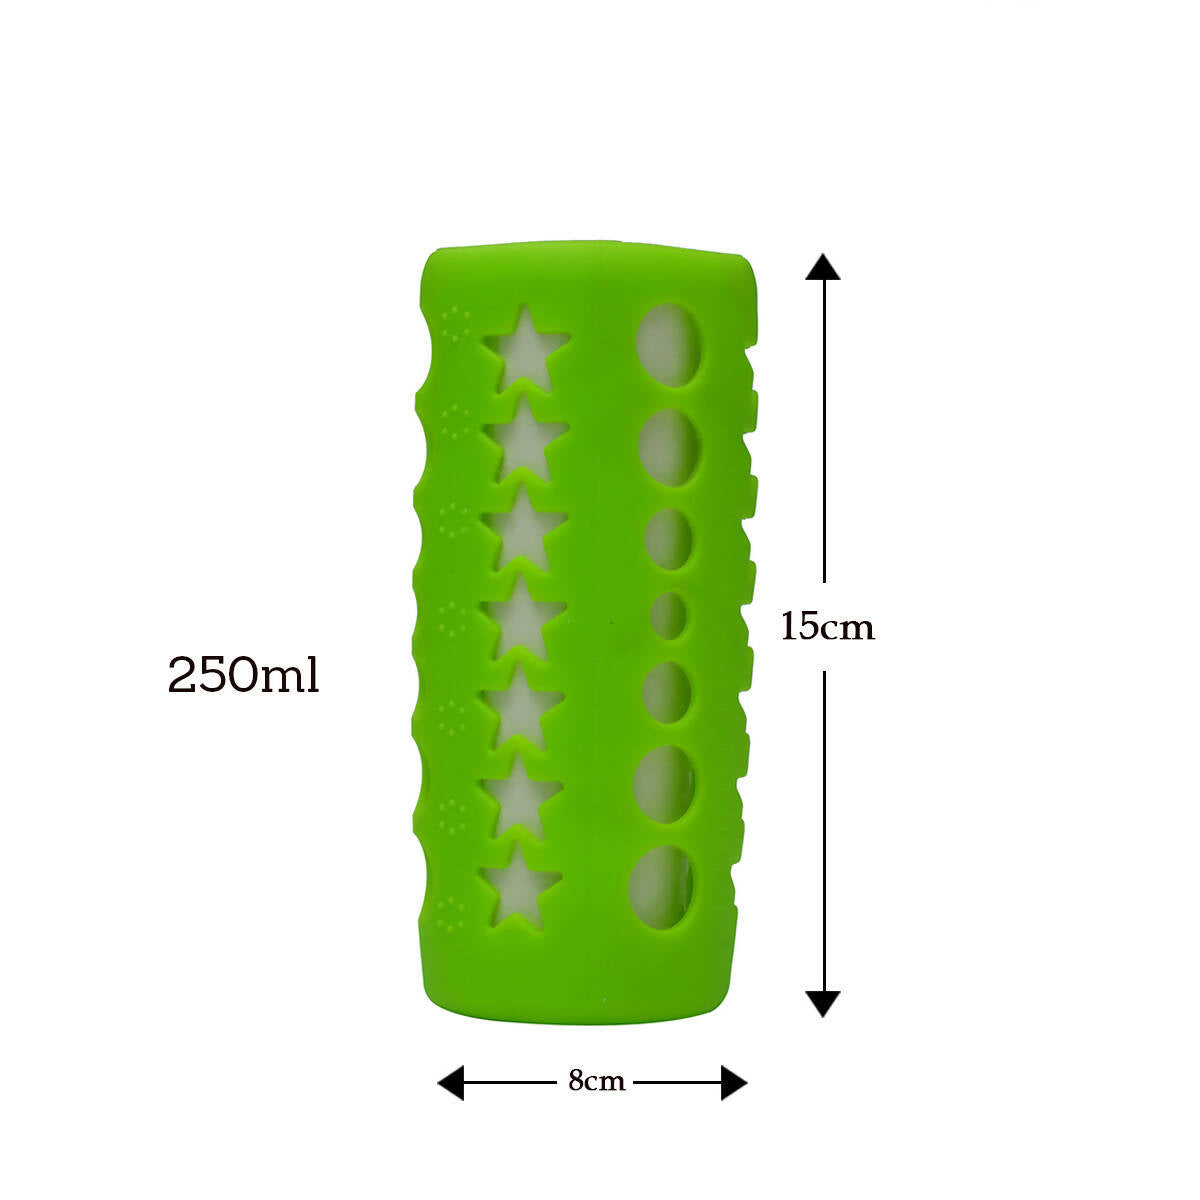 Safe-O-Kid Silicone Baby Feeding Bottle Cover Cum Sleeve for Insulated Protection 250mL- Green